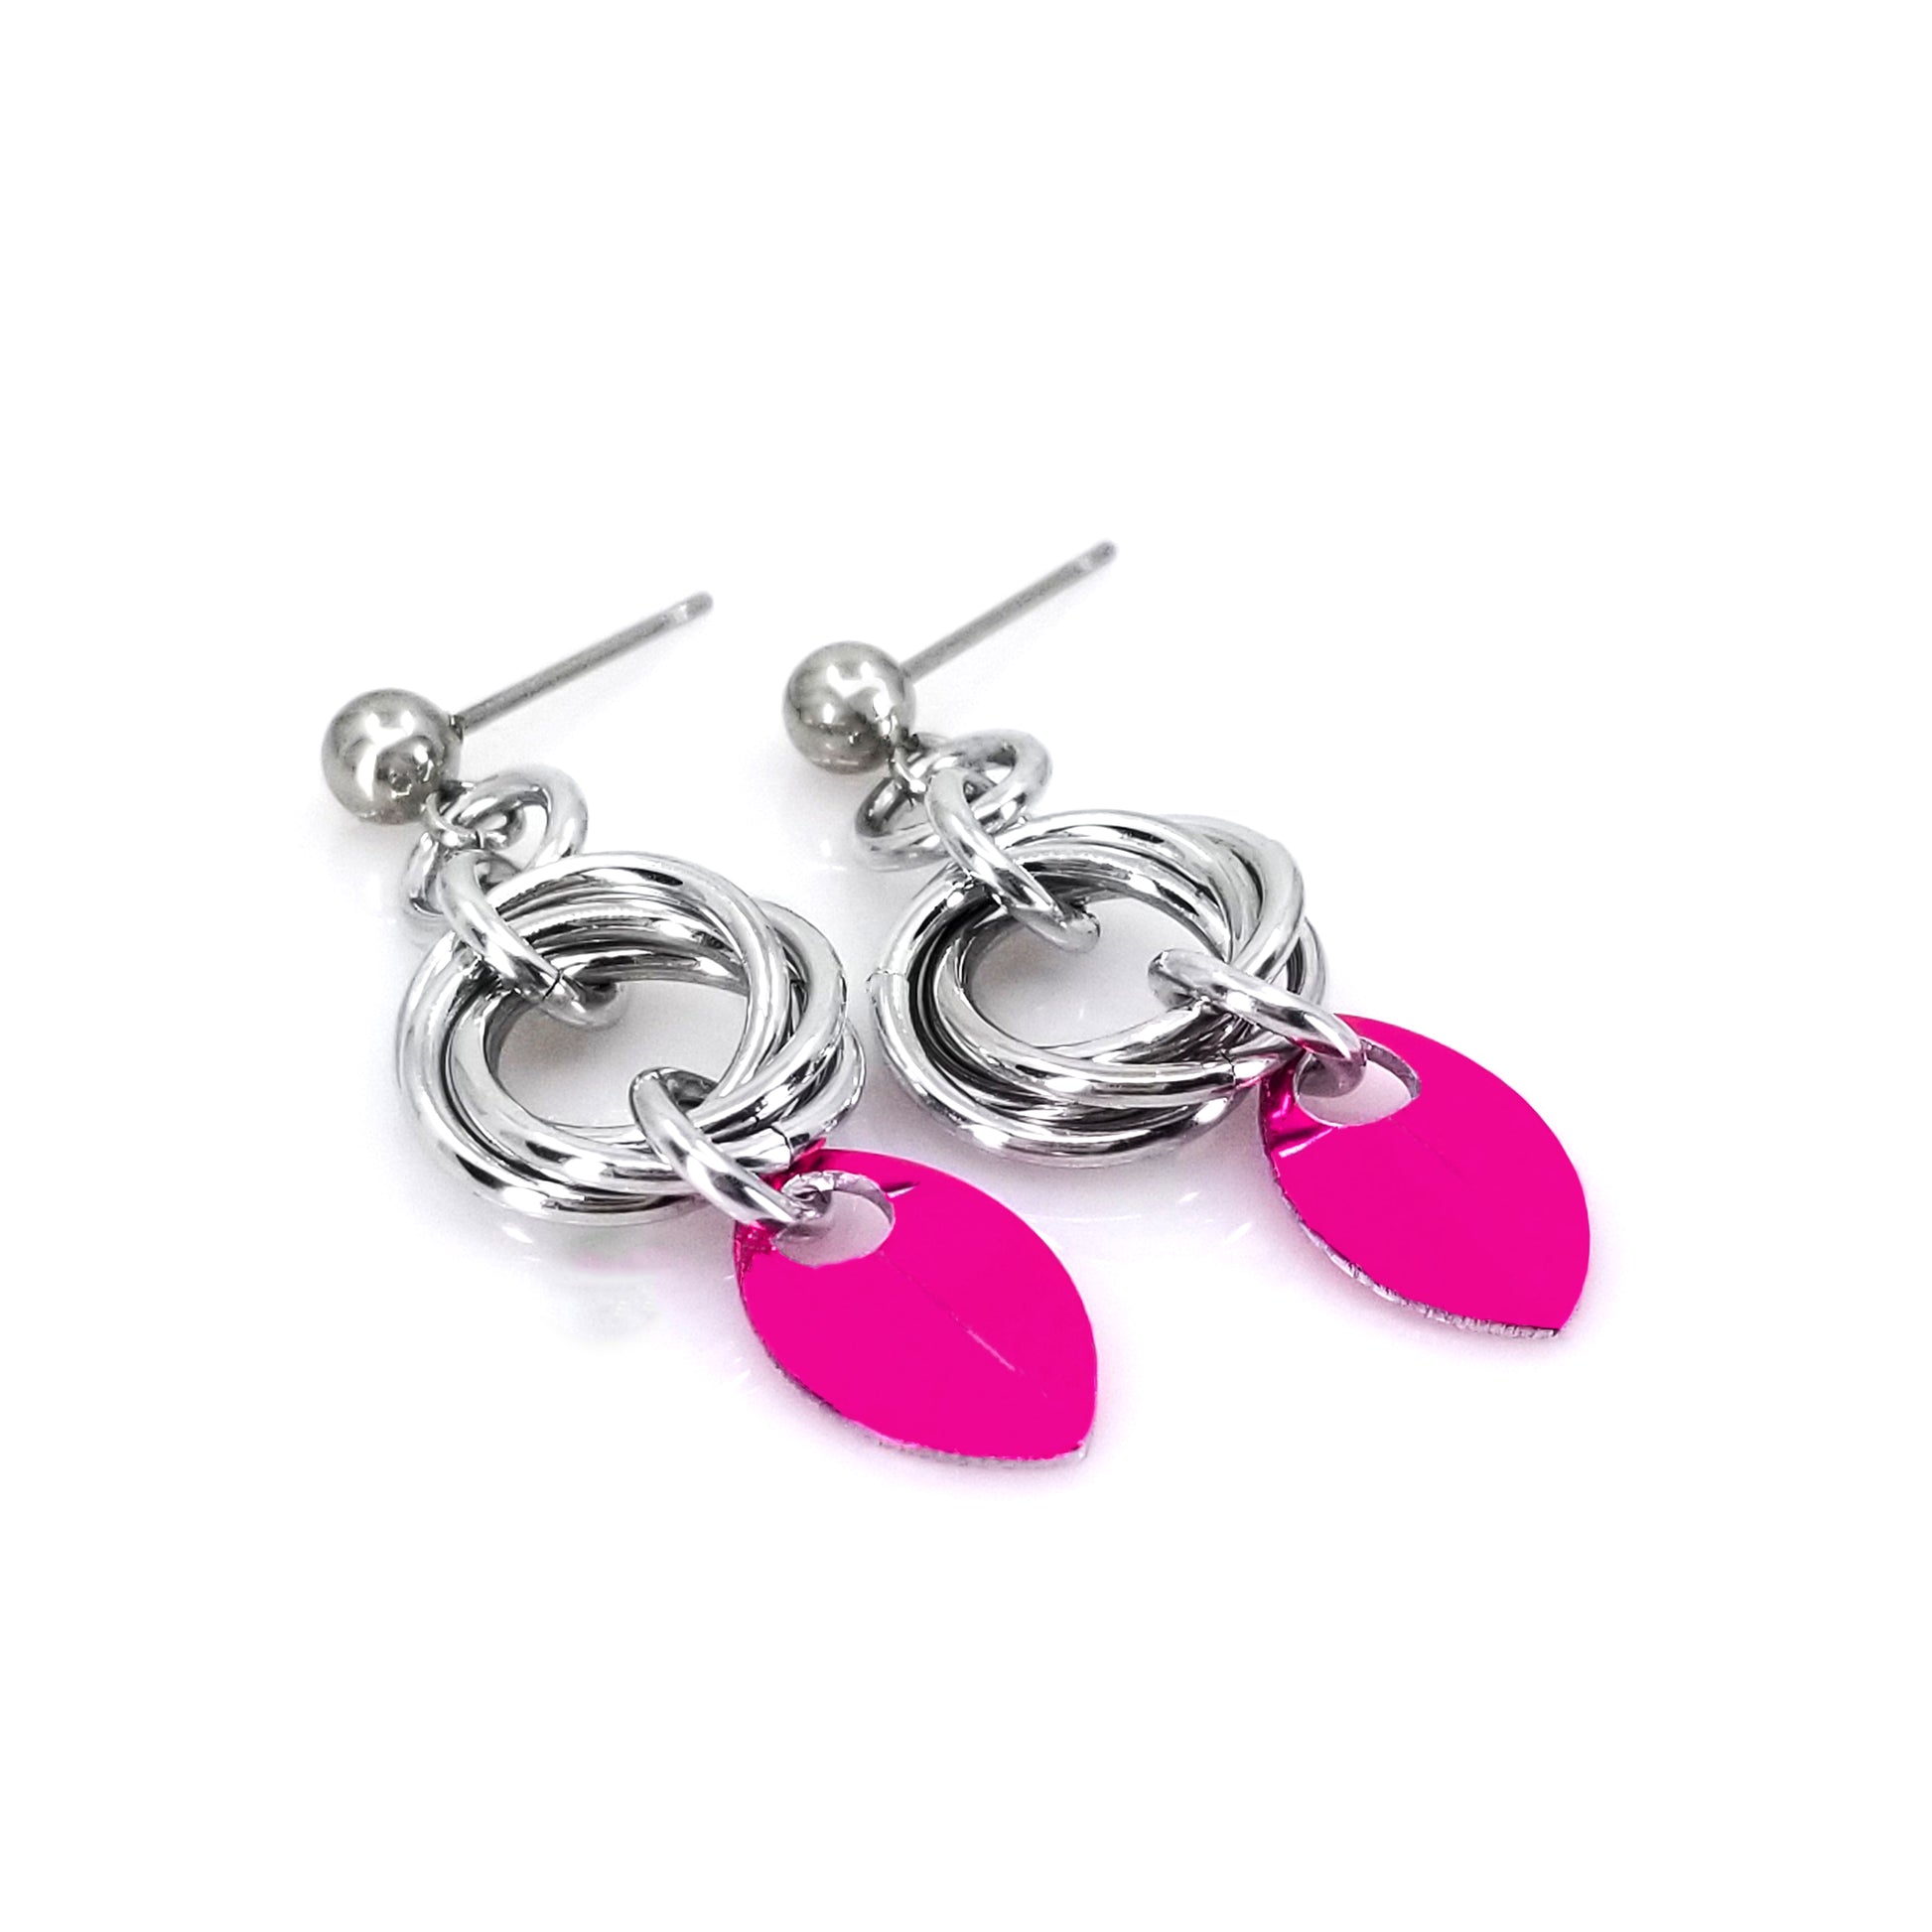 Pink baby scale love knot mobius weave chainmaille aluminum earrings on stainless steel ear post 